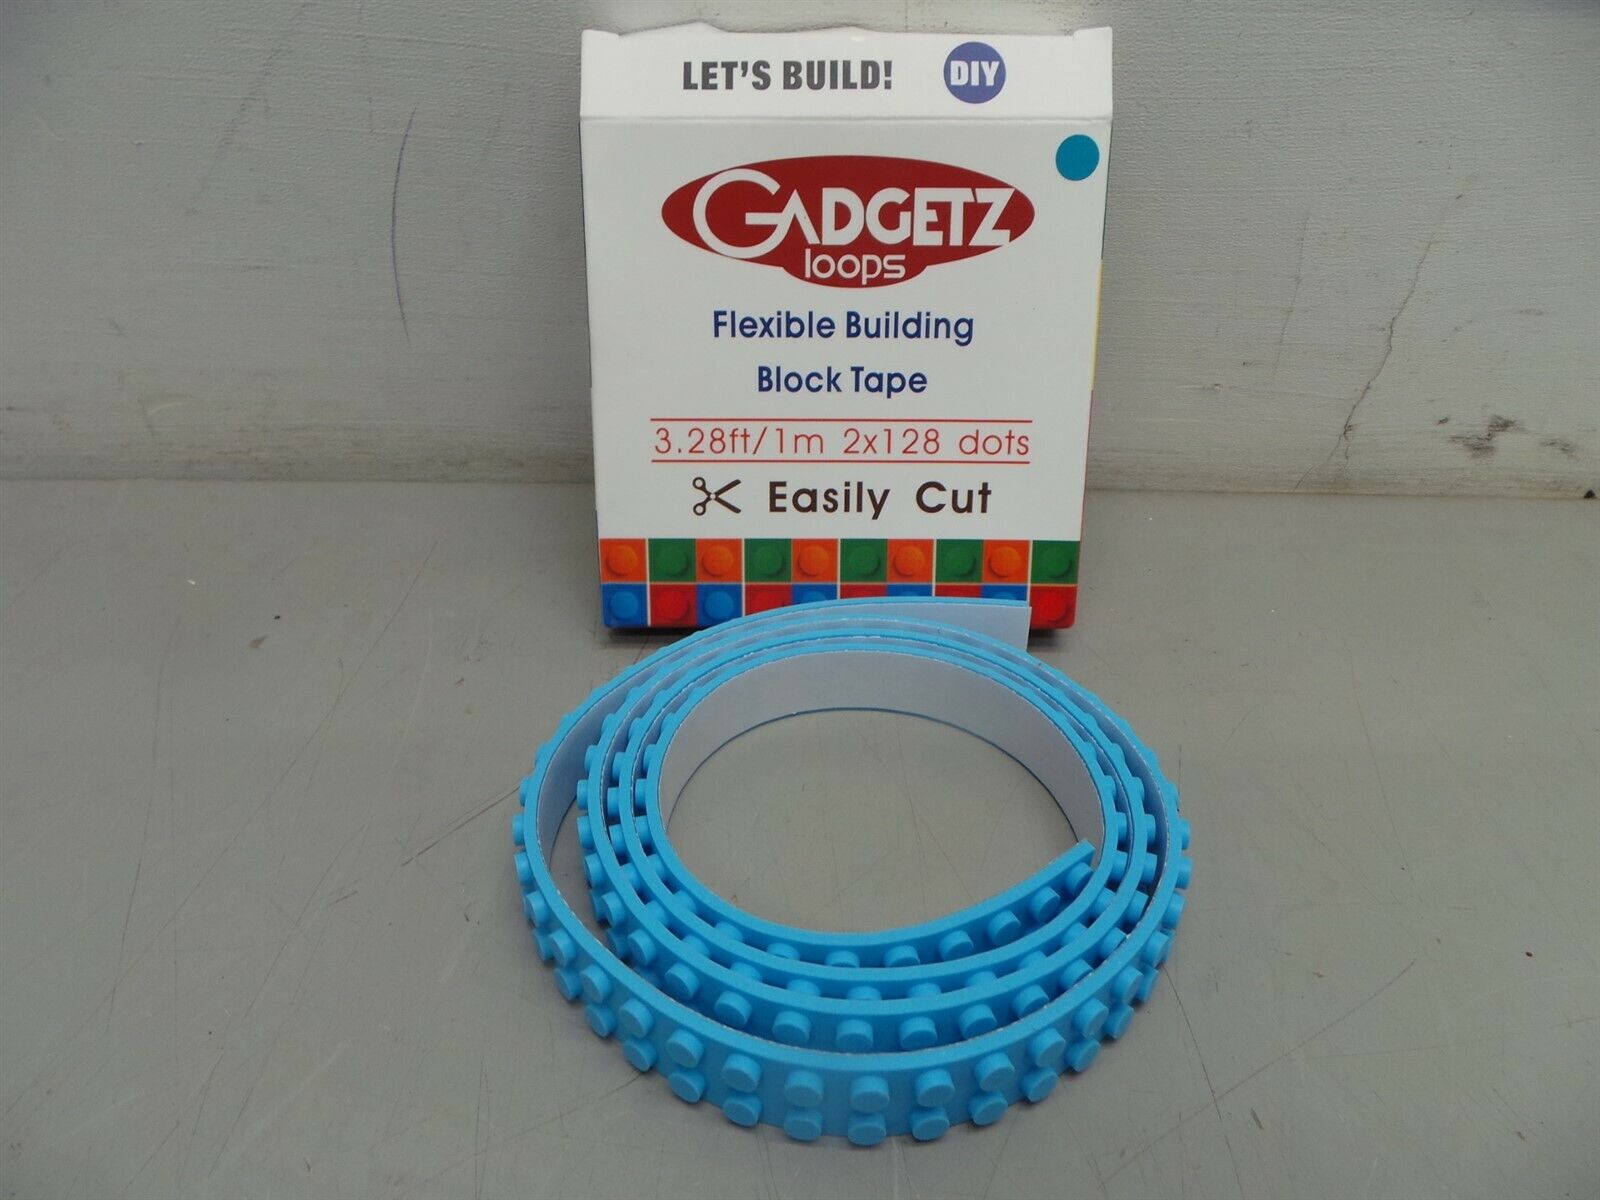 New Building Block Tape for LEGO - Funky 3D Faces